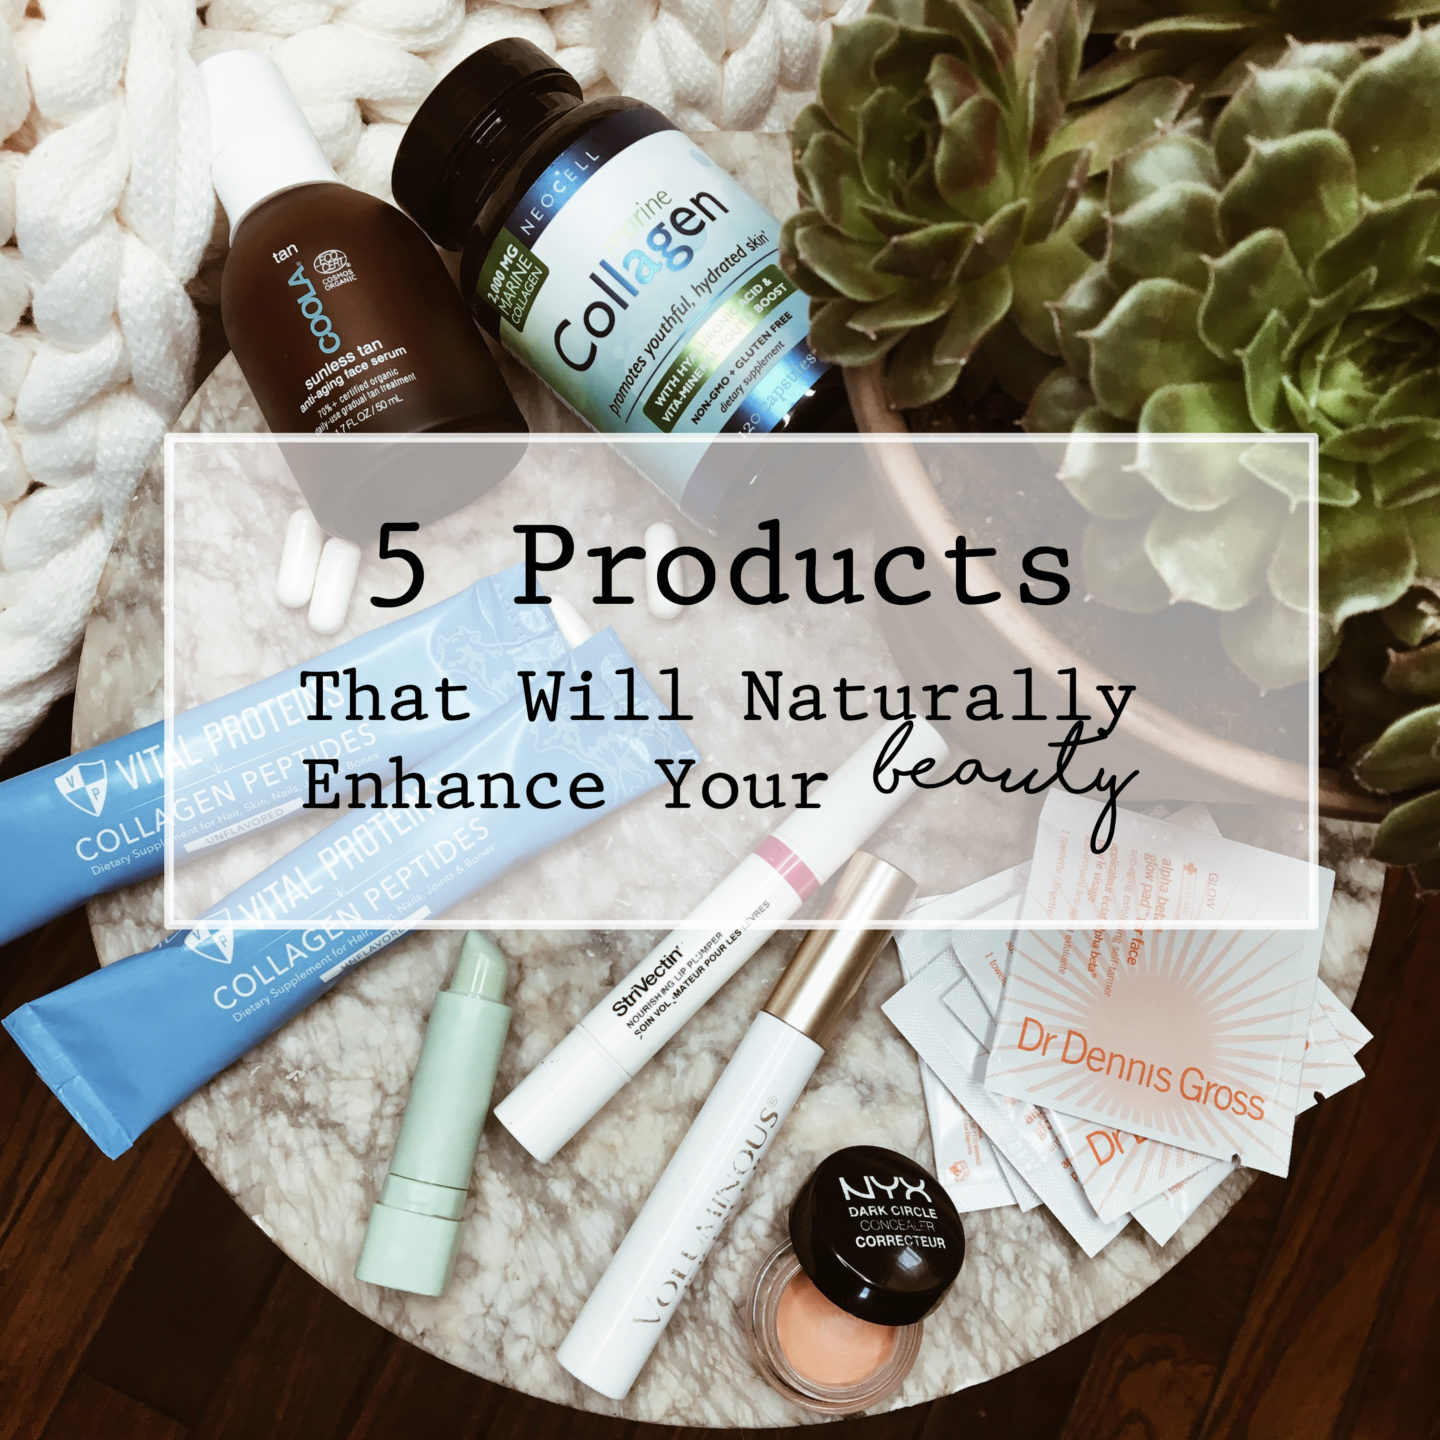 5 Products That Will Naturally Enhance Your Beauty